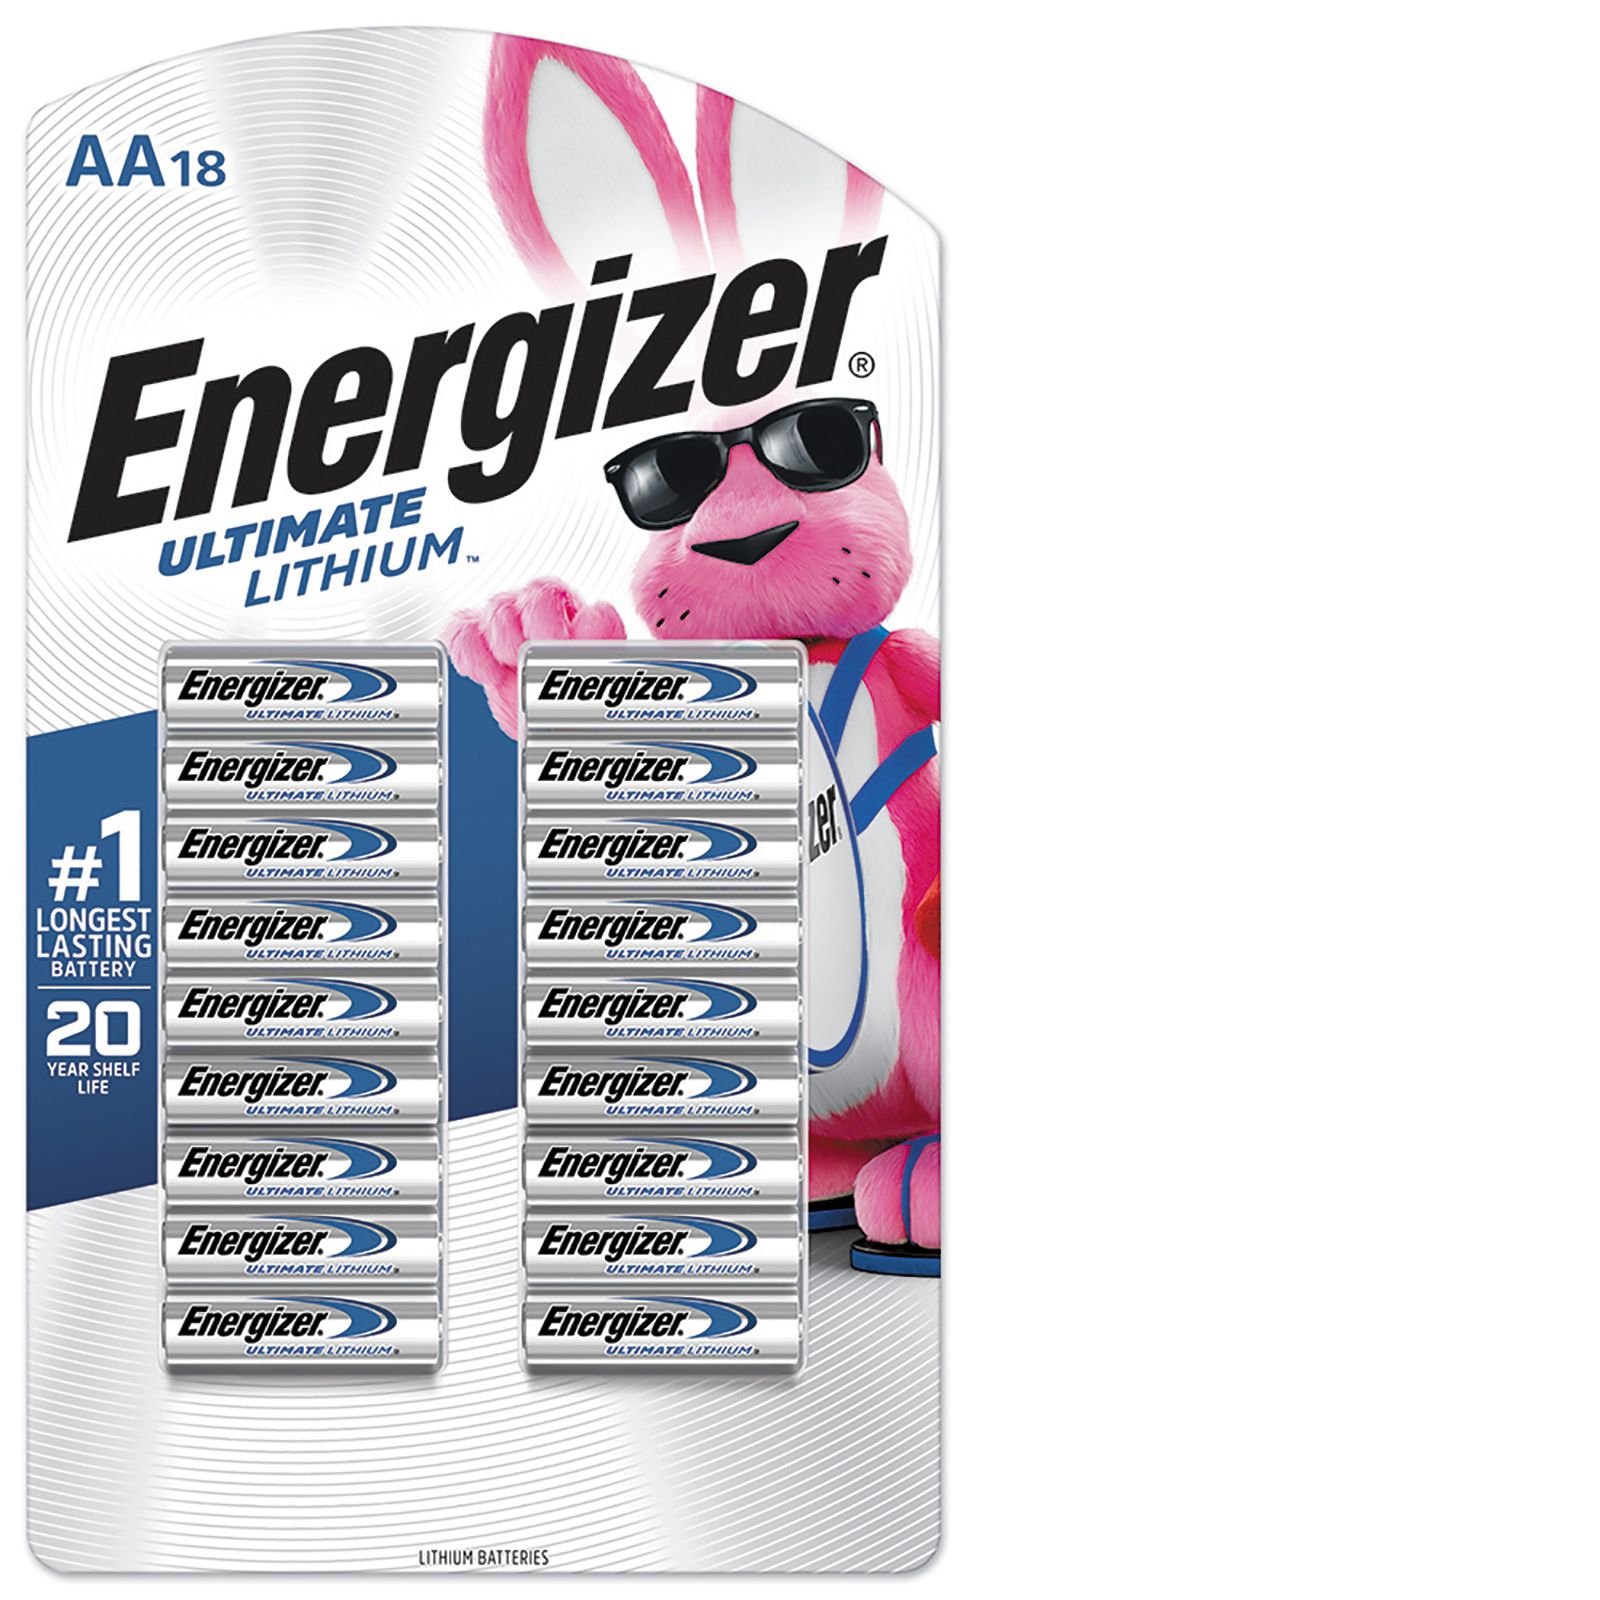 Energizer Ultimate lithium AA battery, 10 pack. - Film Supplies Online